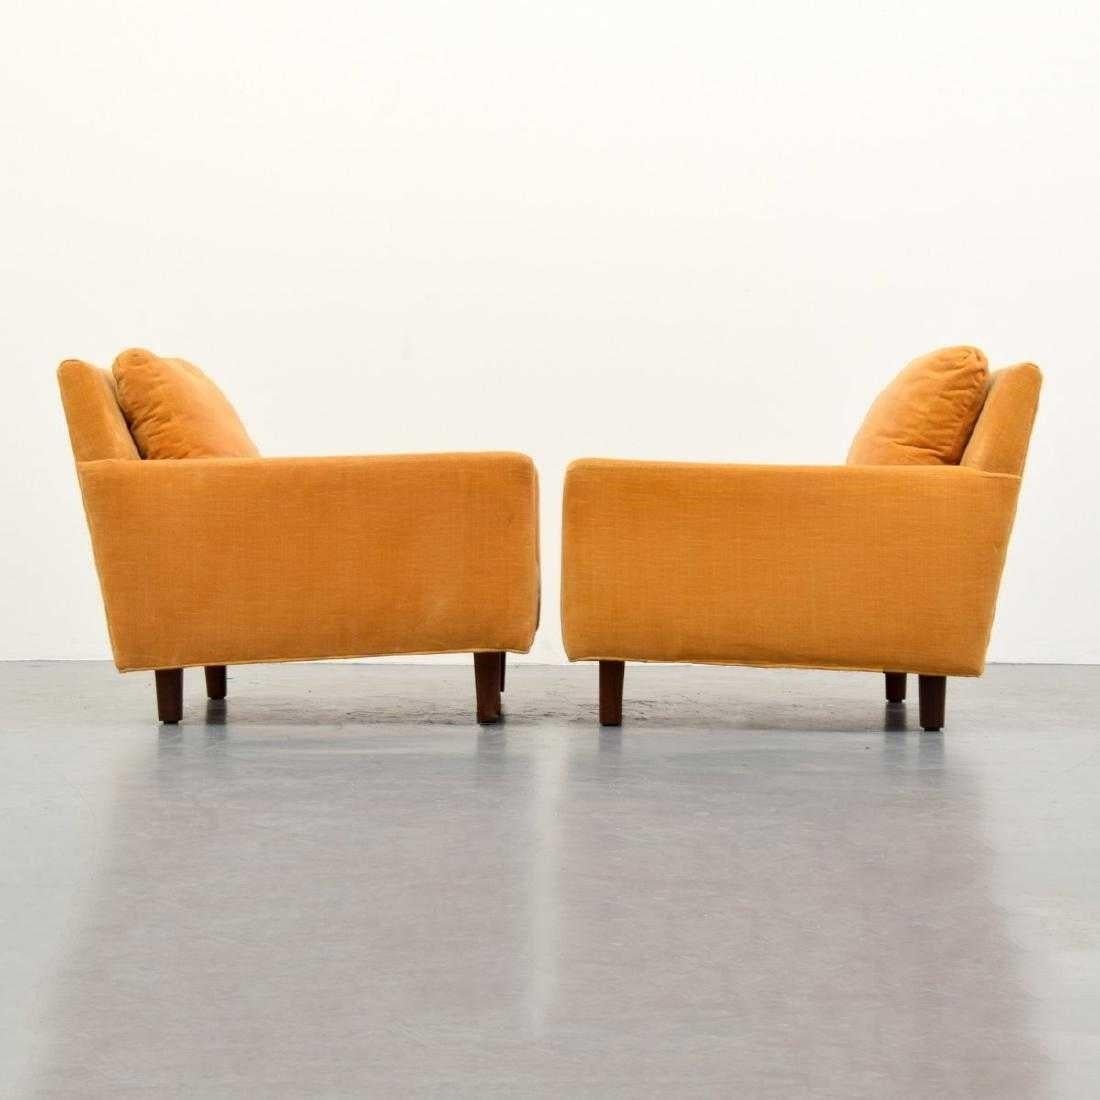 This comfortable pair of midcentury lounge chairs designed by Milo Baughman for Thayer Coggin. Professionally upholstered with orange/yellow colored velvet fabric with solid wood feet.